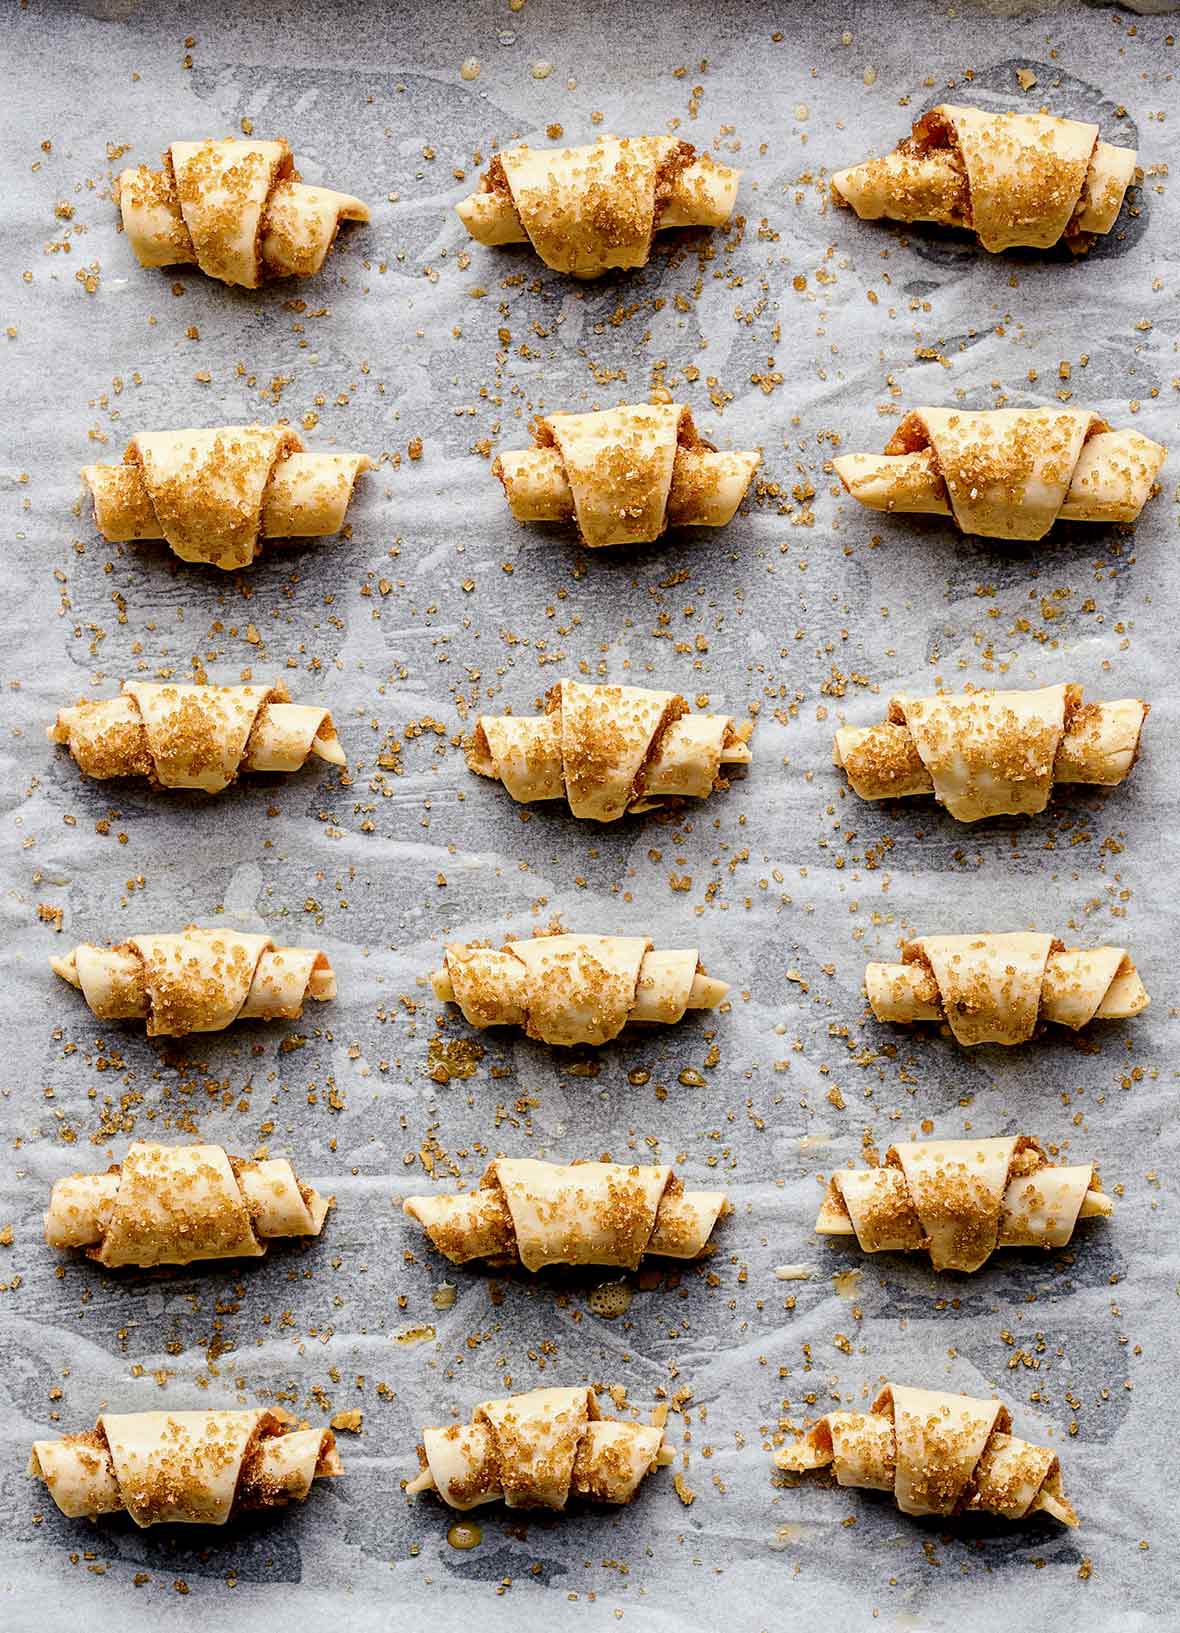 18 individual pieces of uncooked walnut rugelach on a parchment-lined baking sheet.